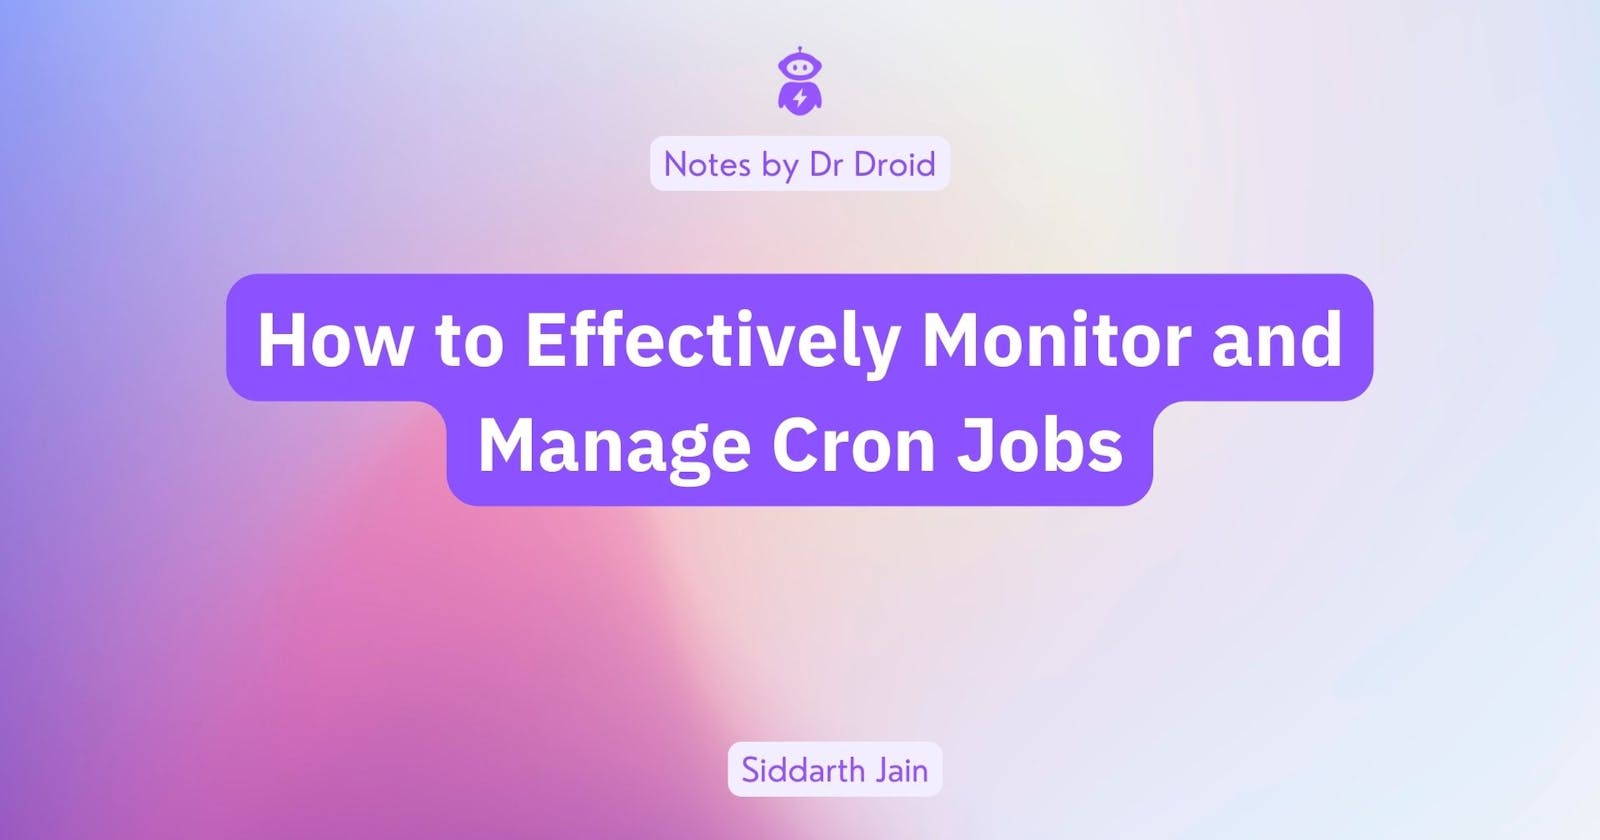 How to Effectively Monitor Cron Jobs Using Dr Droid